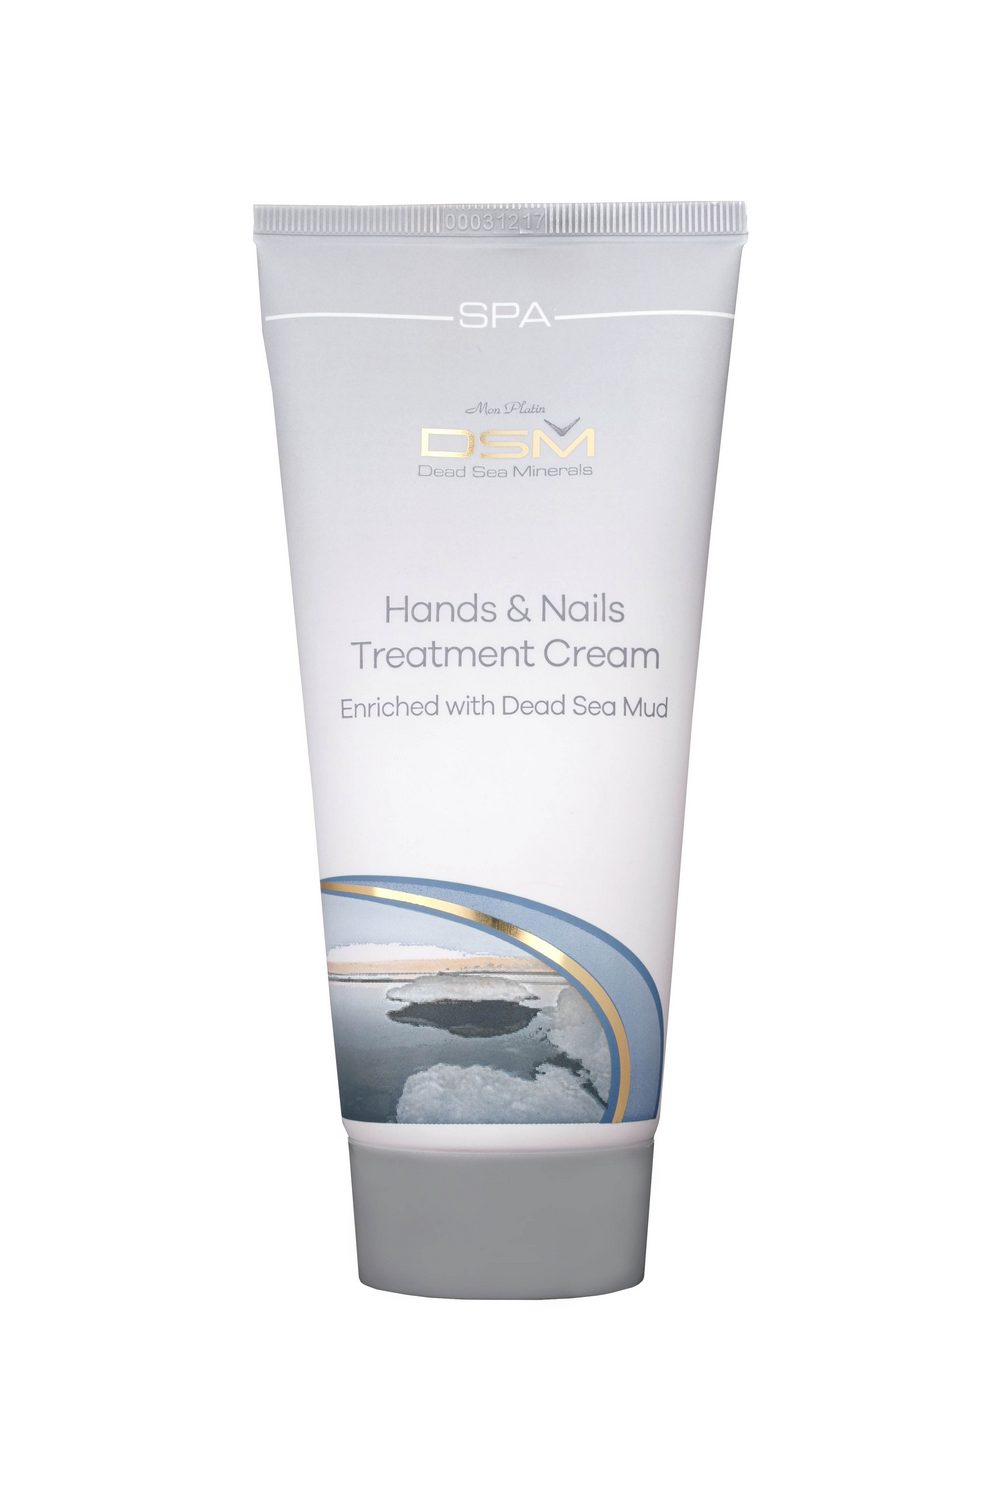 Hands & Nails Treatment Cream with Dead Sea Mud